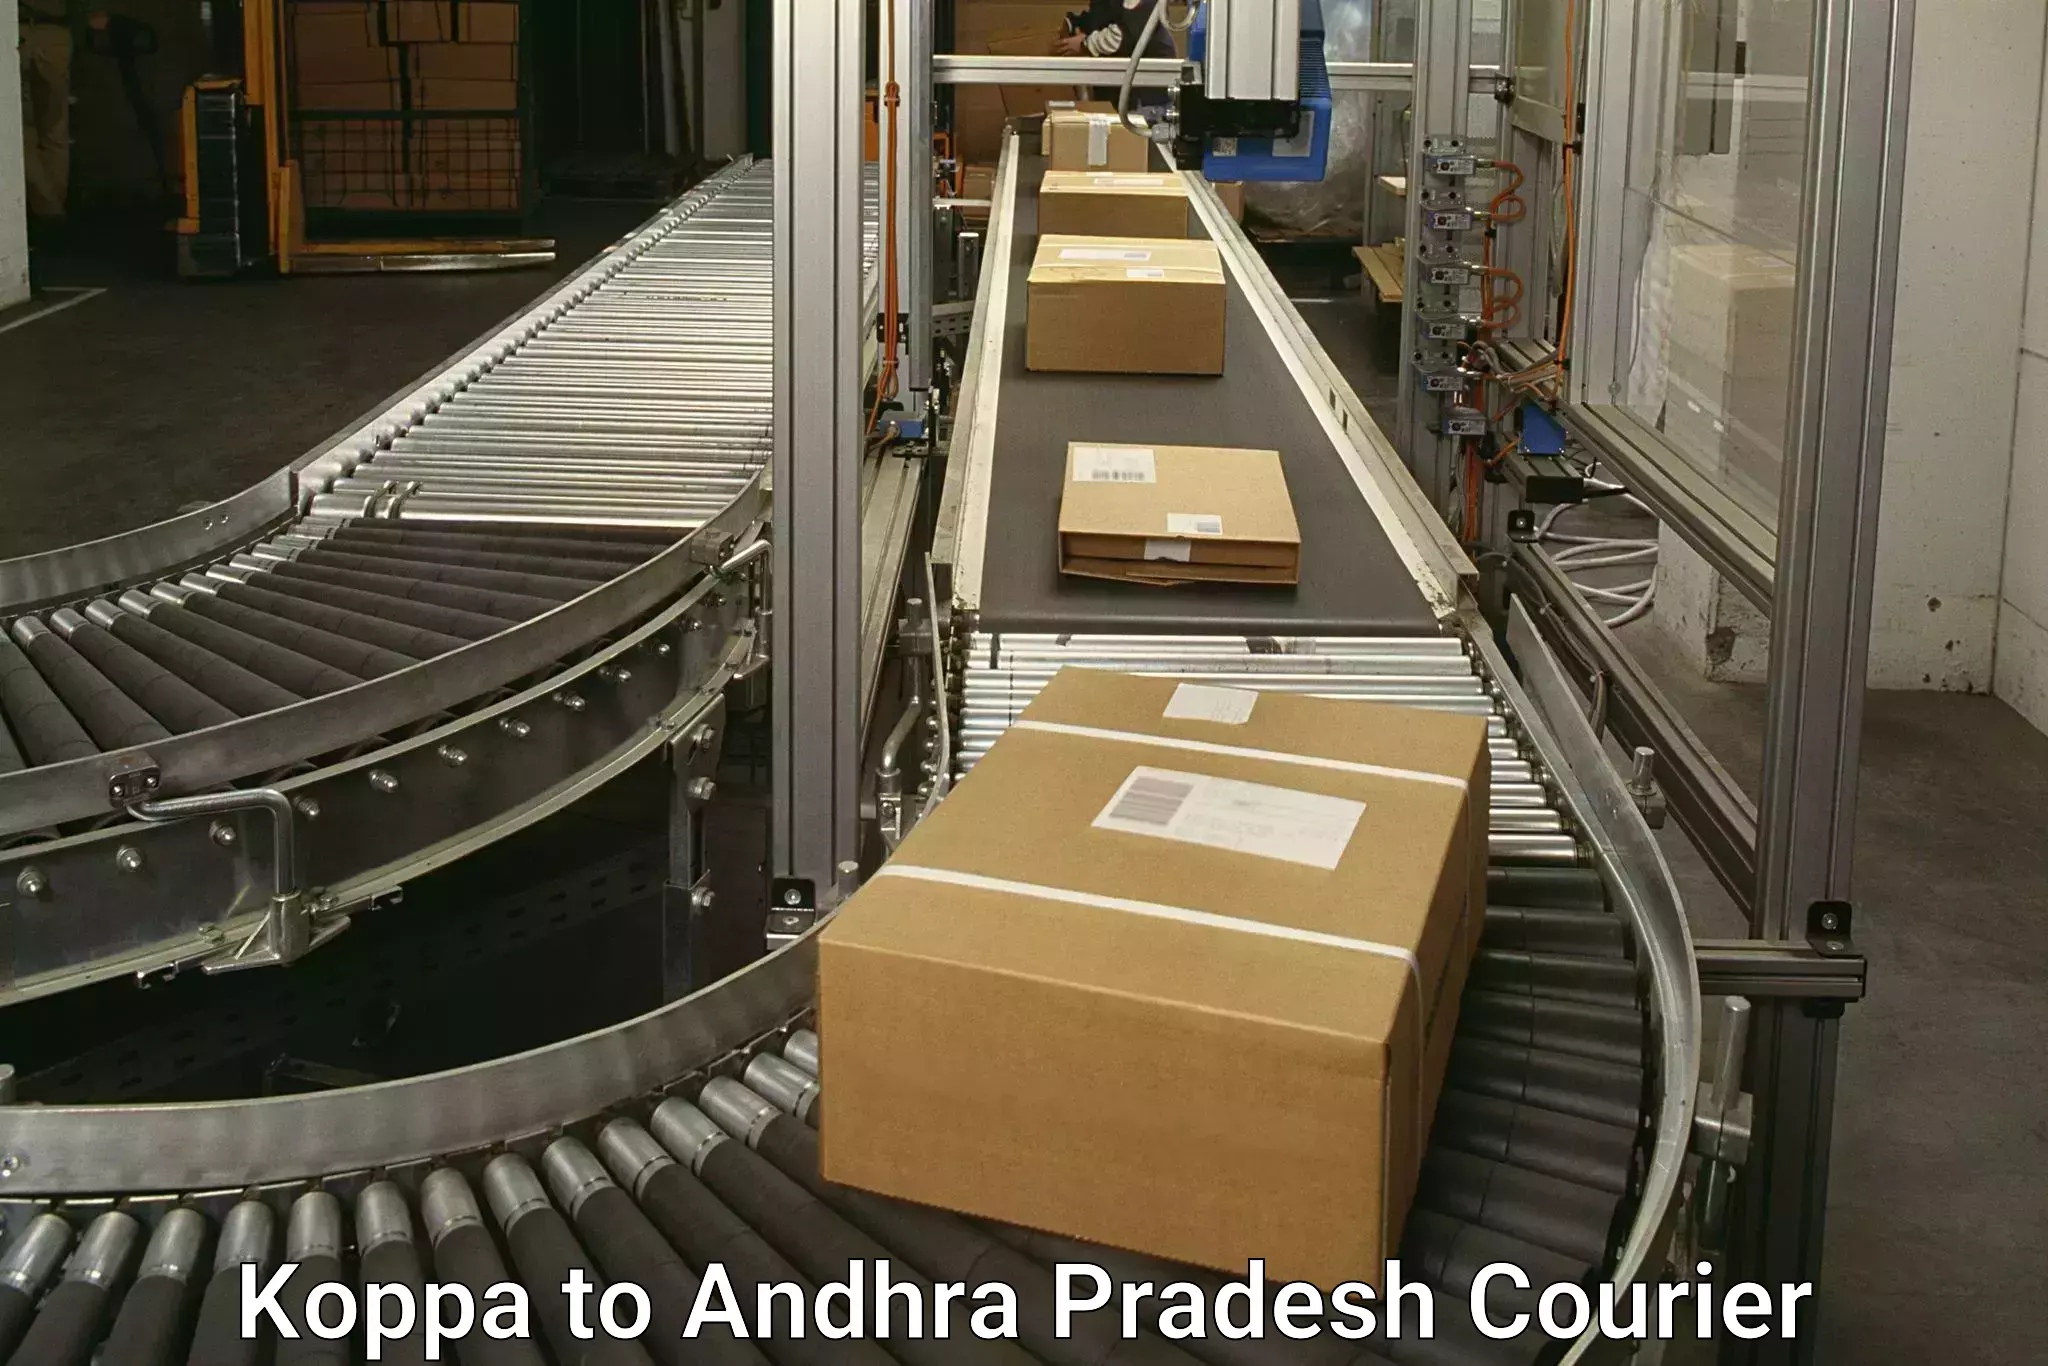 Parcel handling and care in Koppa to Sirvella